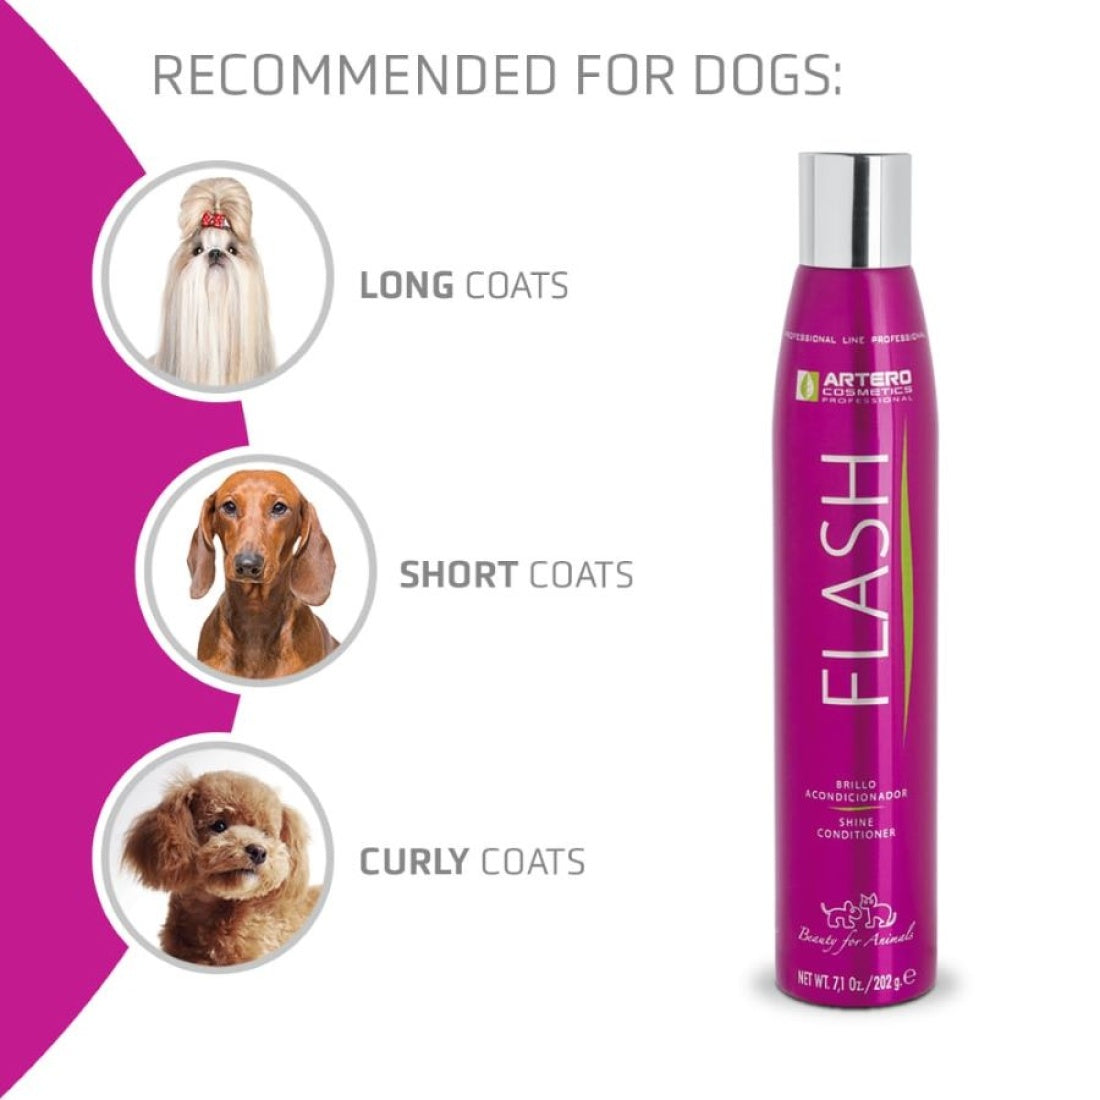 Artero Flash Professional Pet Grooming Conditioner Spray 7.1 oz is a plant-based leave-in pet conditioner that quickly eliminates frizz, creating a silky, smooth texture that facilitates combing and detangling. It controls static electricity and provides a protective, non-greasy coating that prevents knots and tangles.